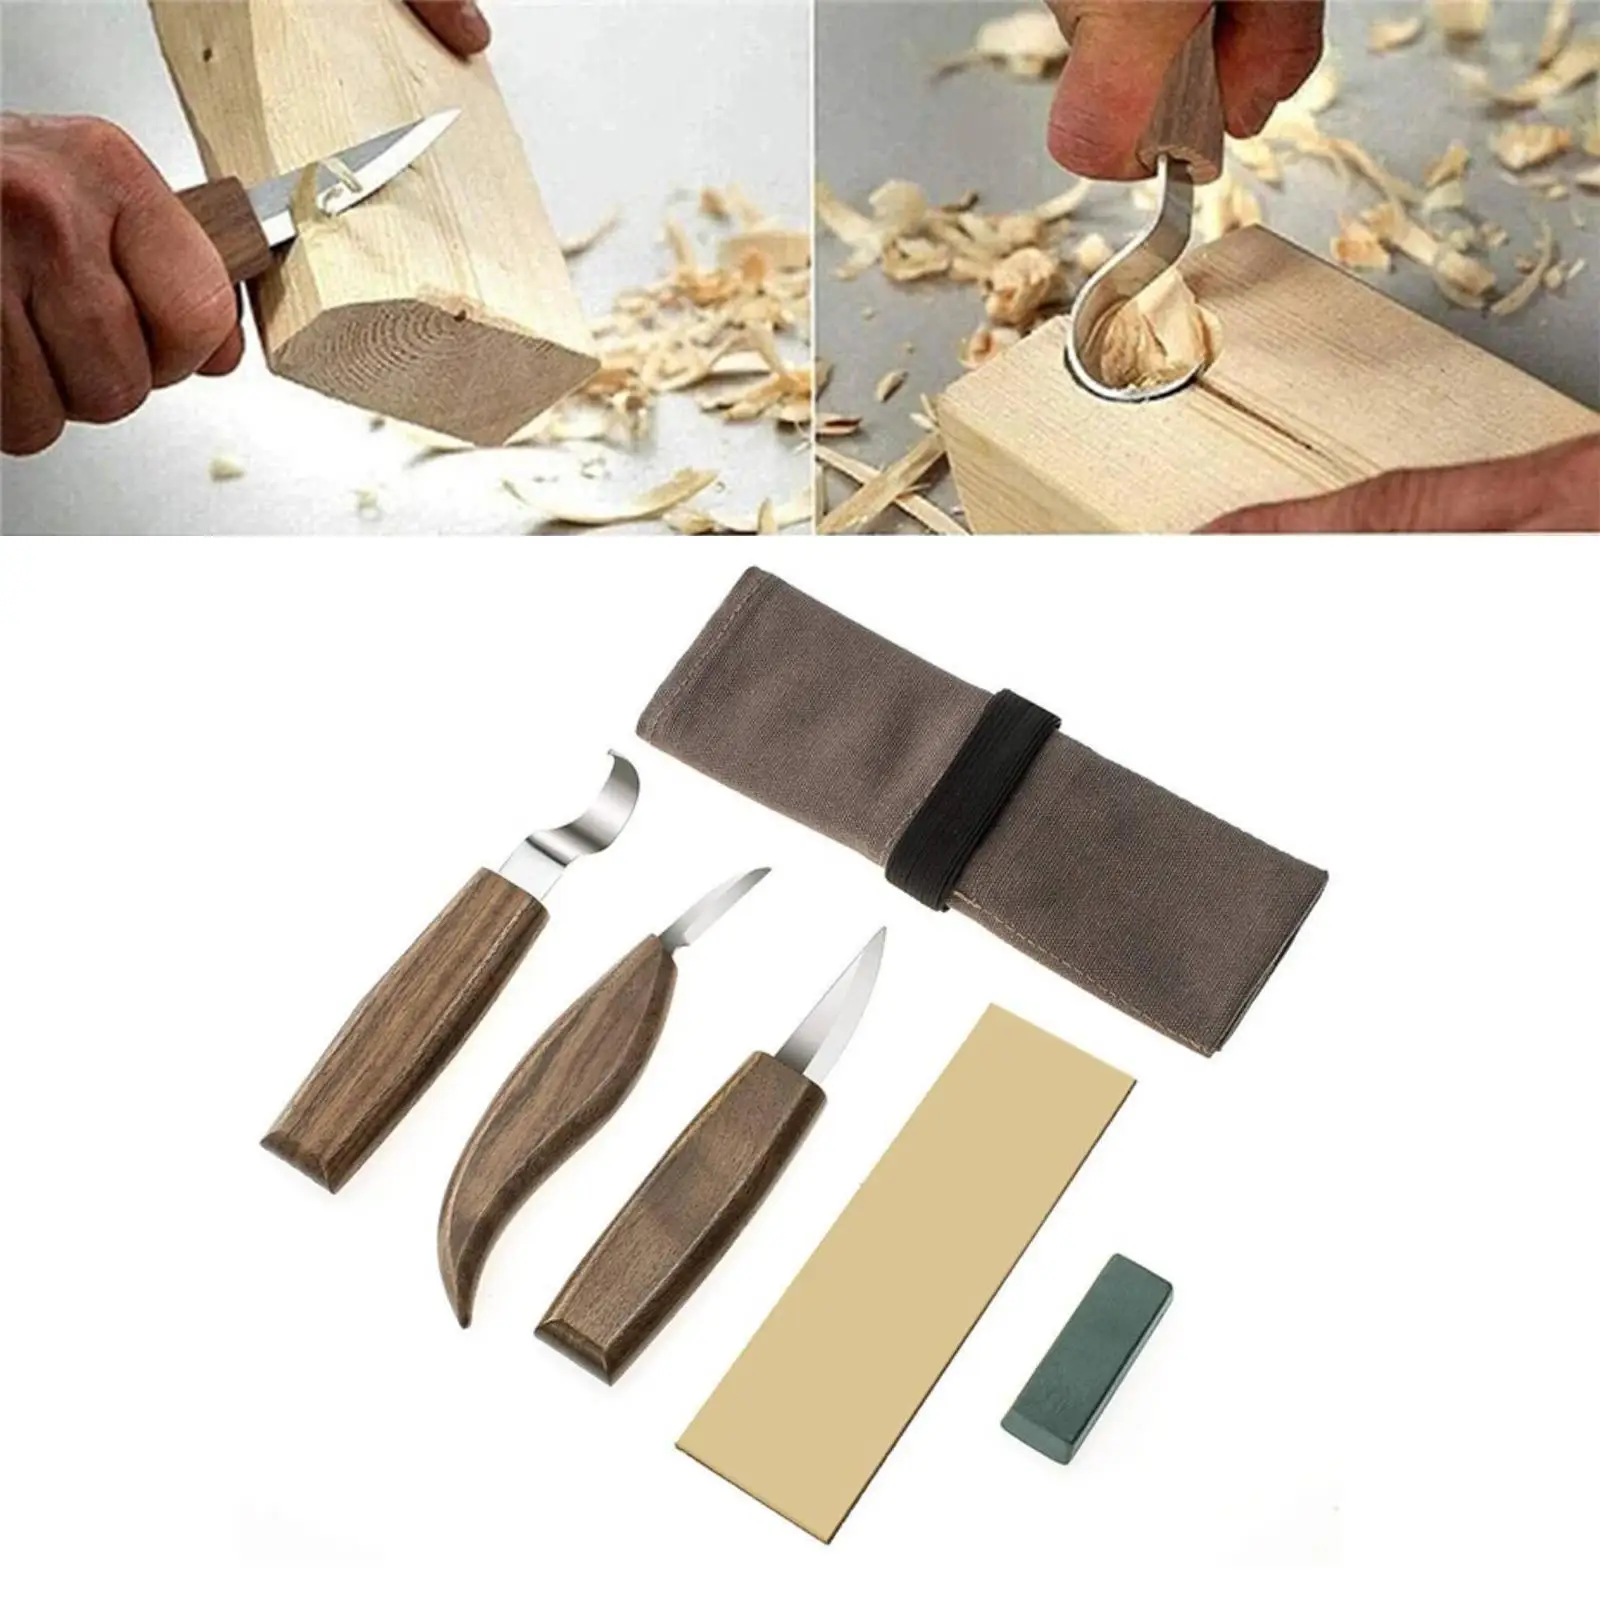 Professional Wood Carving Whittling Knives Set Woodworking Crafts DIY Adults